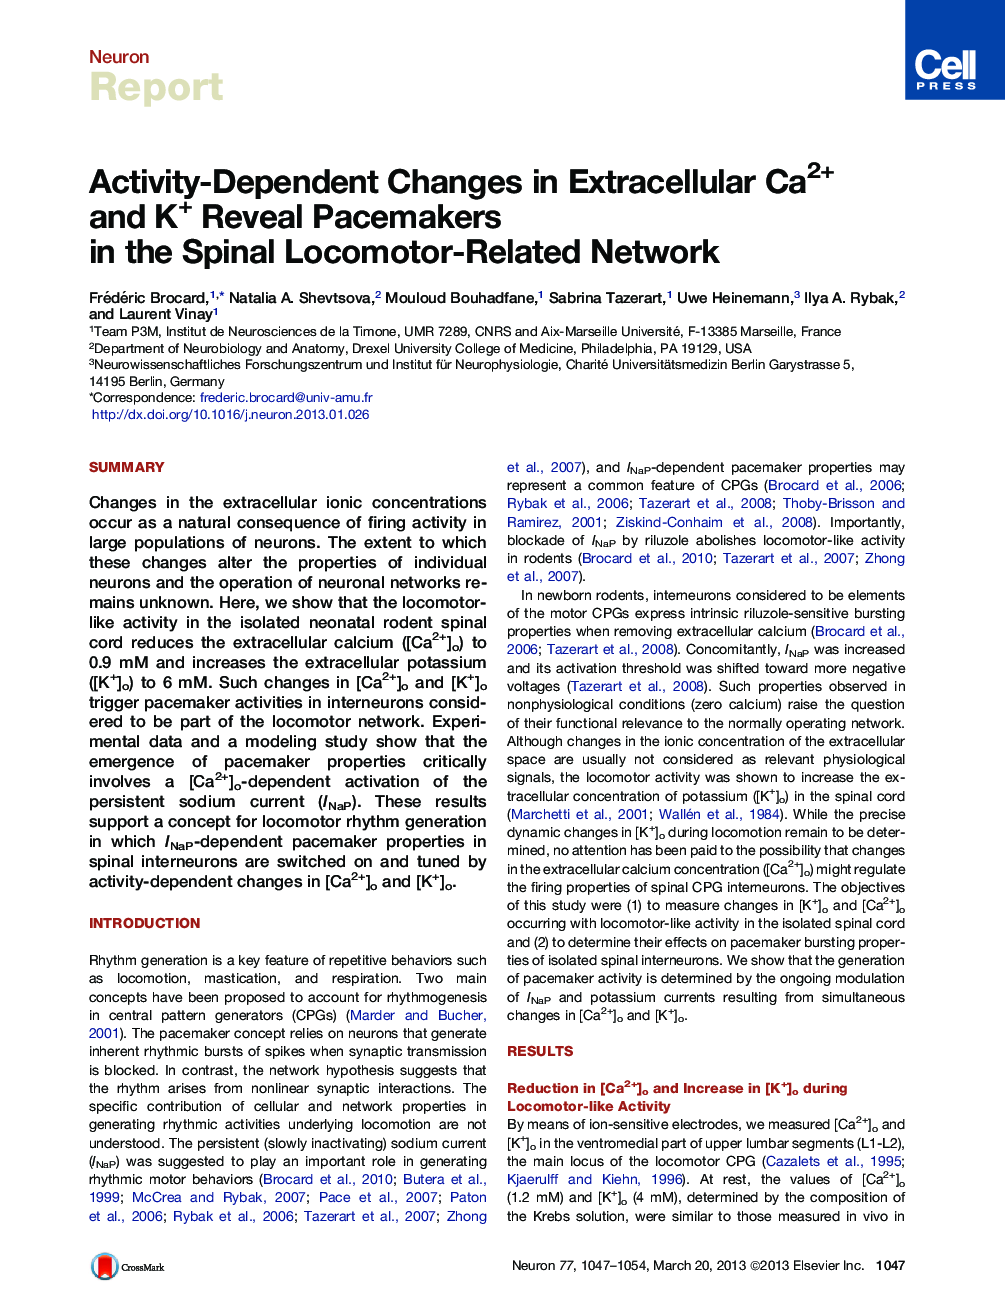 Activity-Dependent Changes in Extracellular Ca2+ and K+ Reveal Pacemakers in the Spinal Locomotor-Related Network